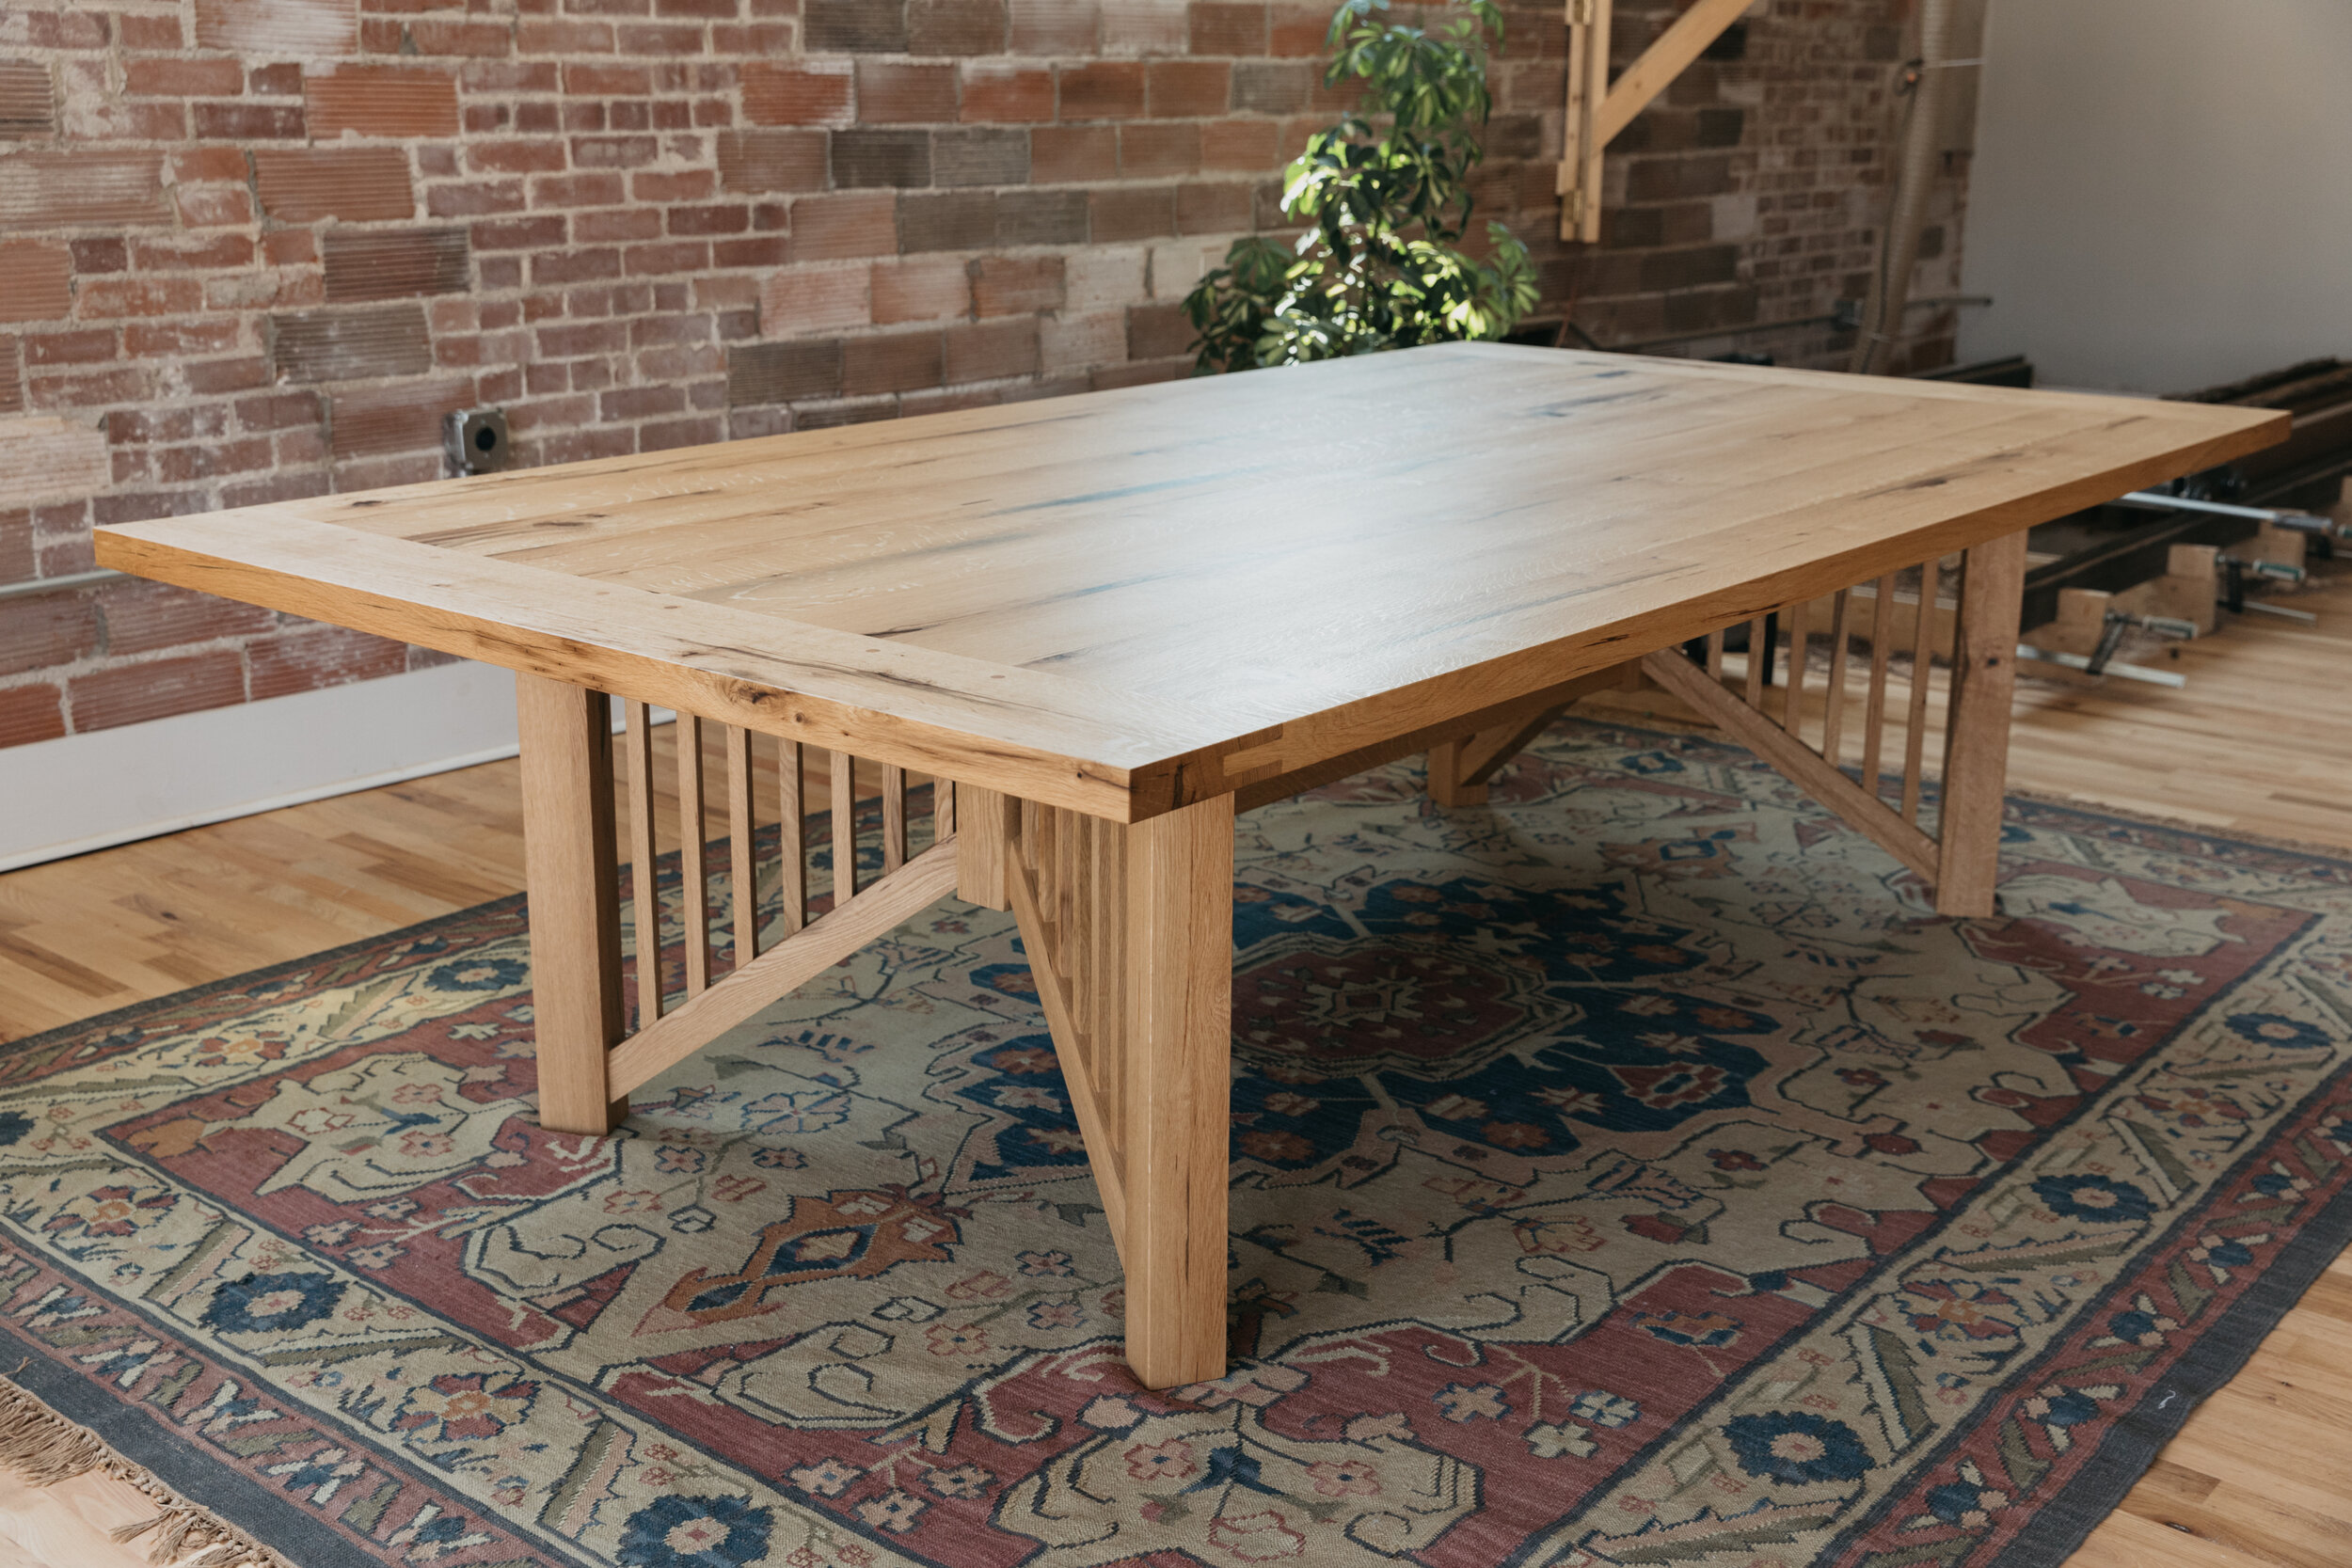 furniture maker_white oak dining table_architectural_Indiana-26.jpg